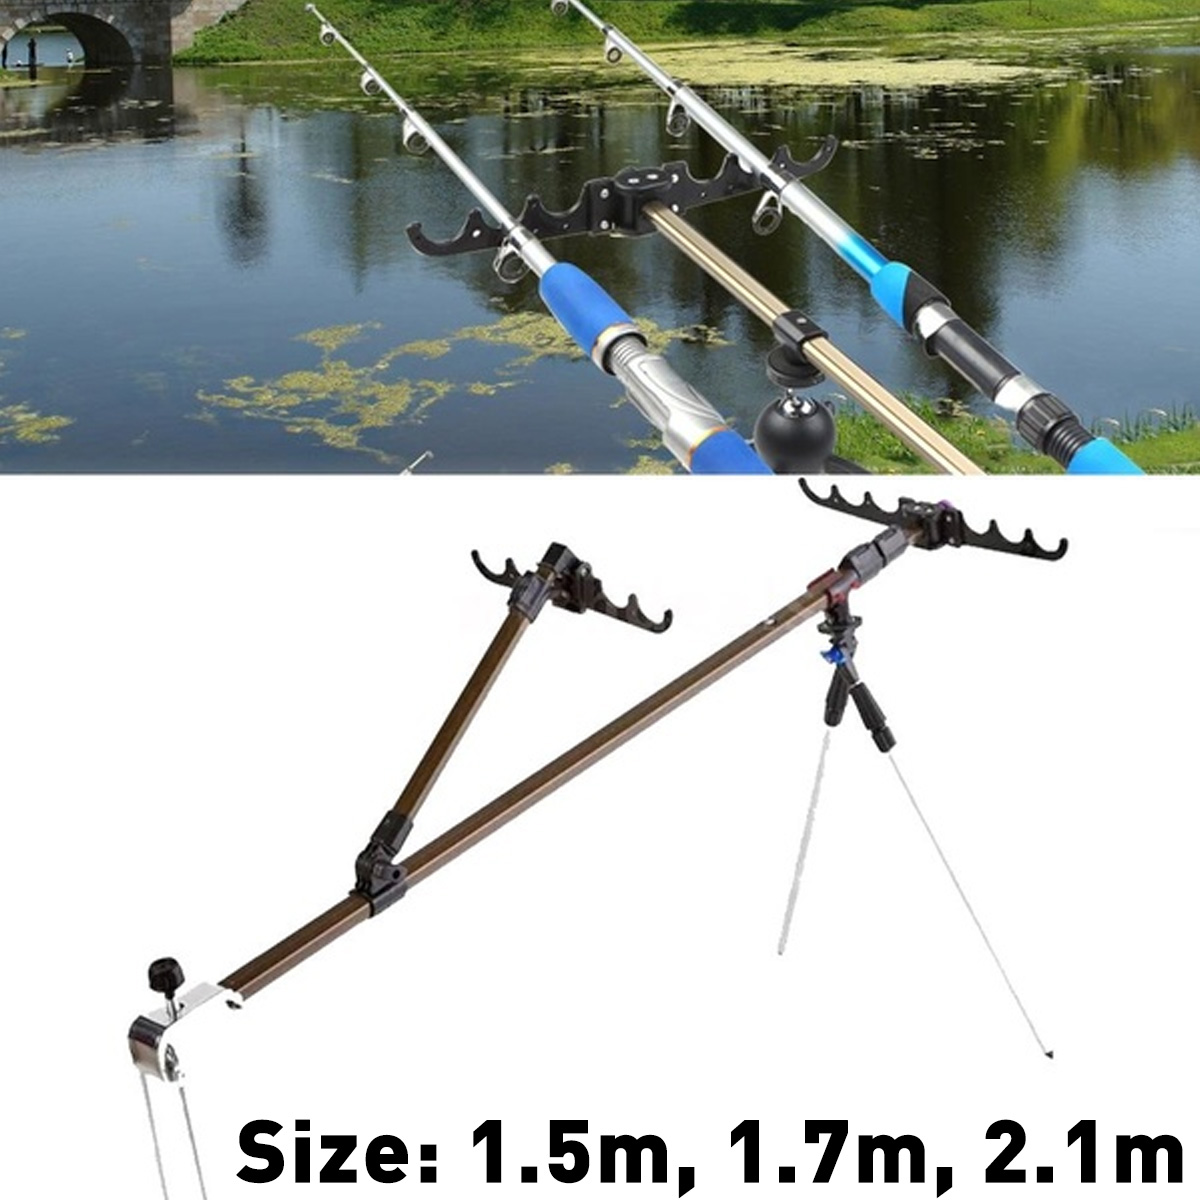 ZANLURE-1517m-Alloy-Fishing-Rod-Holder-Adjustable-Fish-Pole-Stand-Bracket-With-Support-Tripod-1619944-1